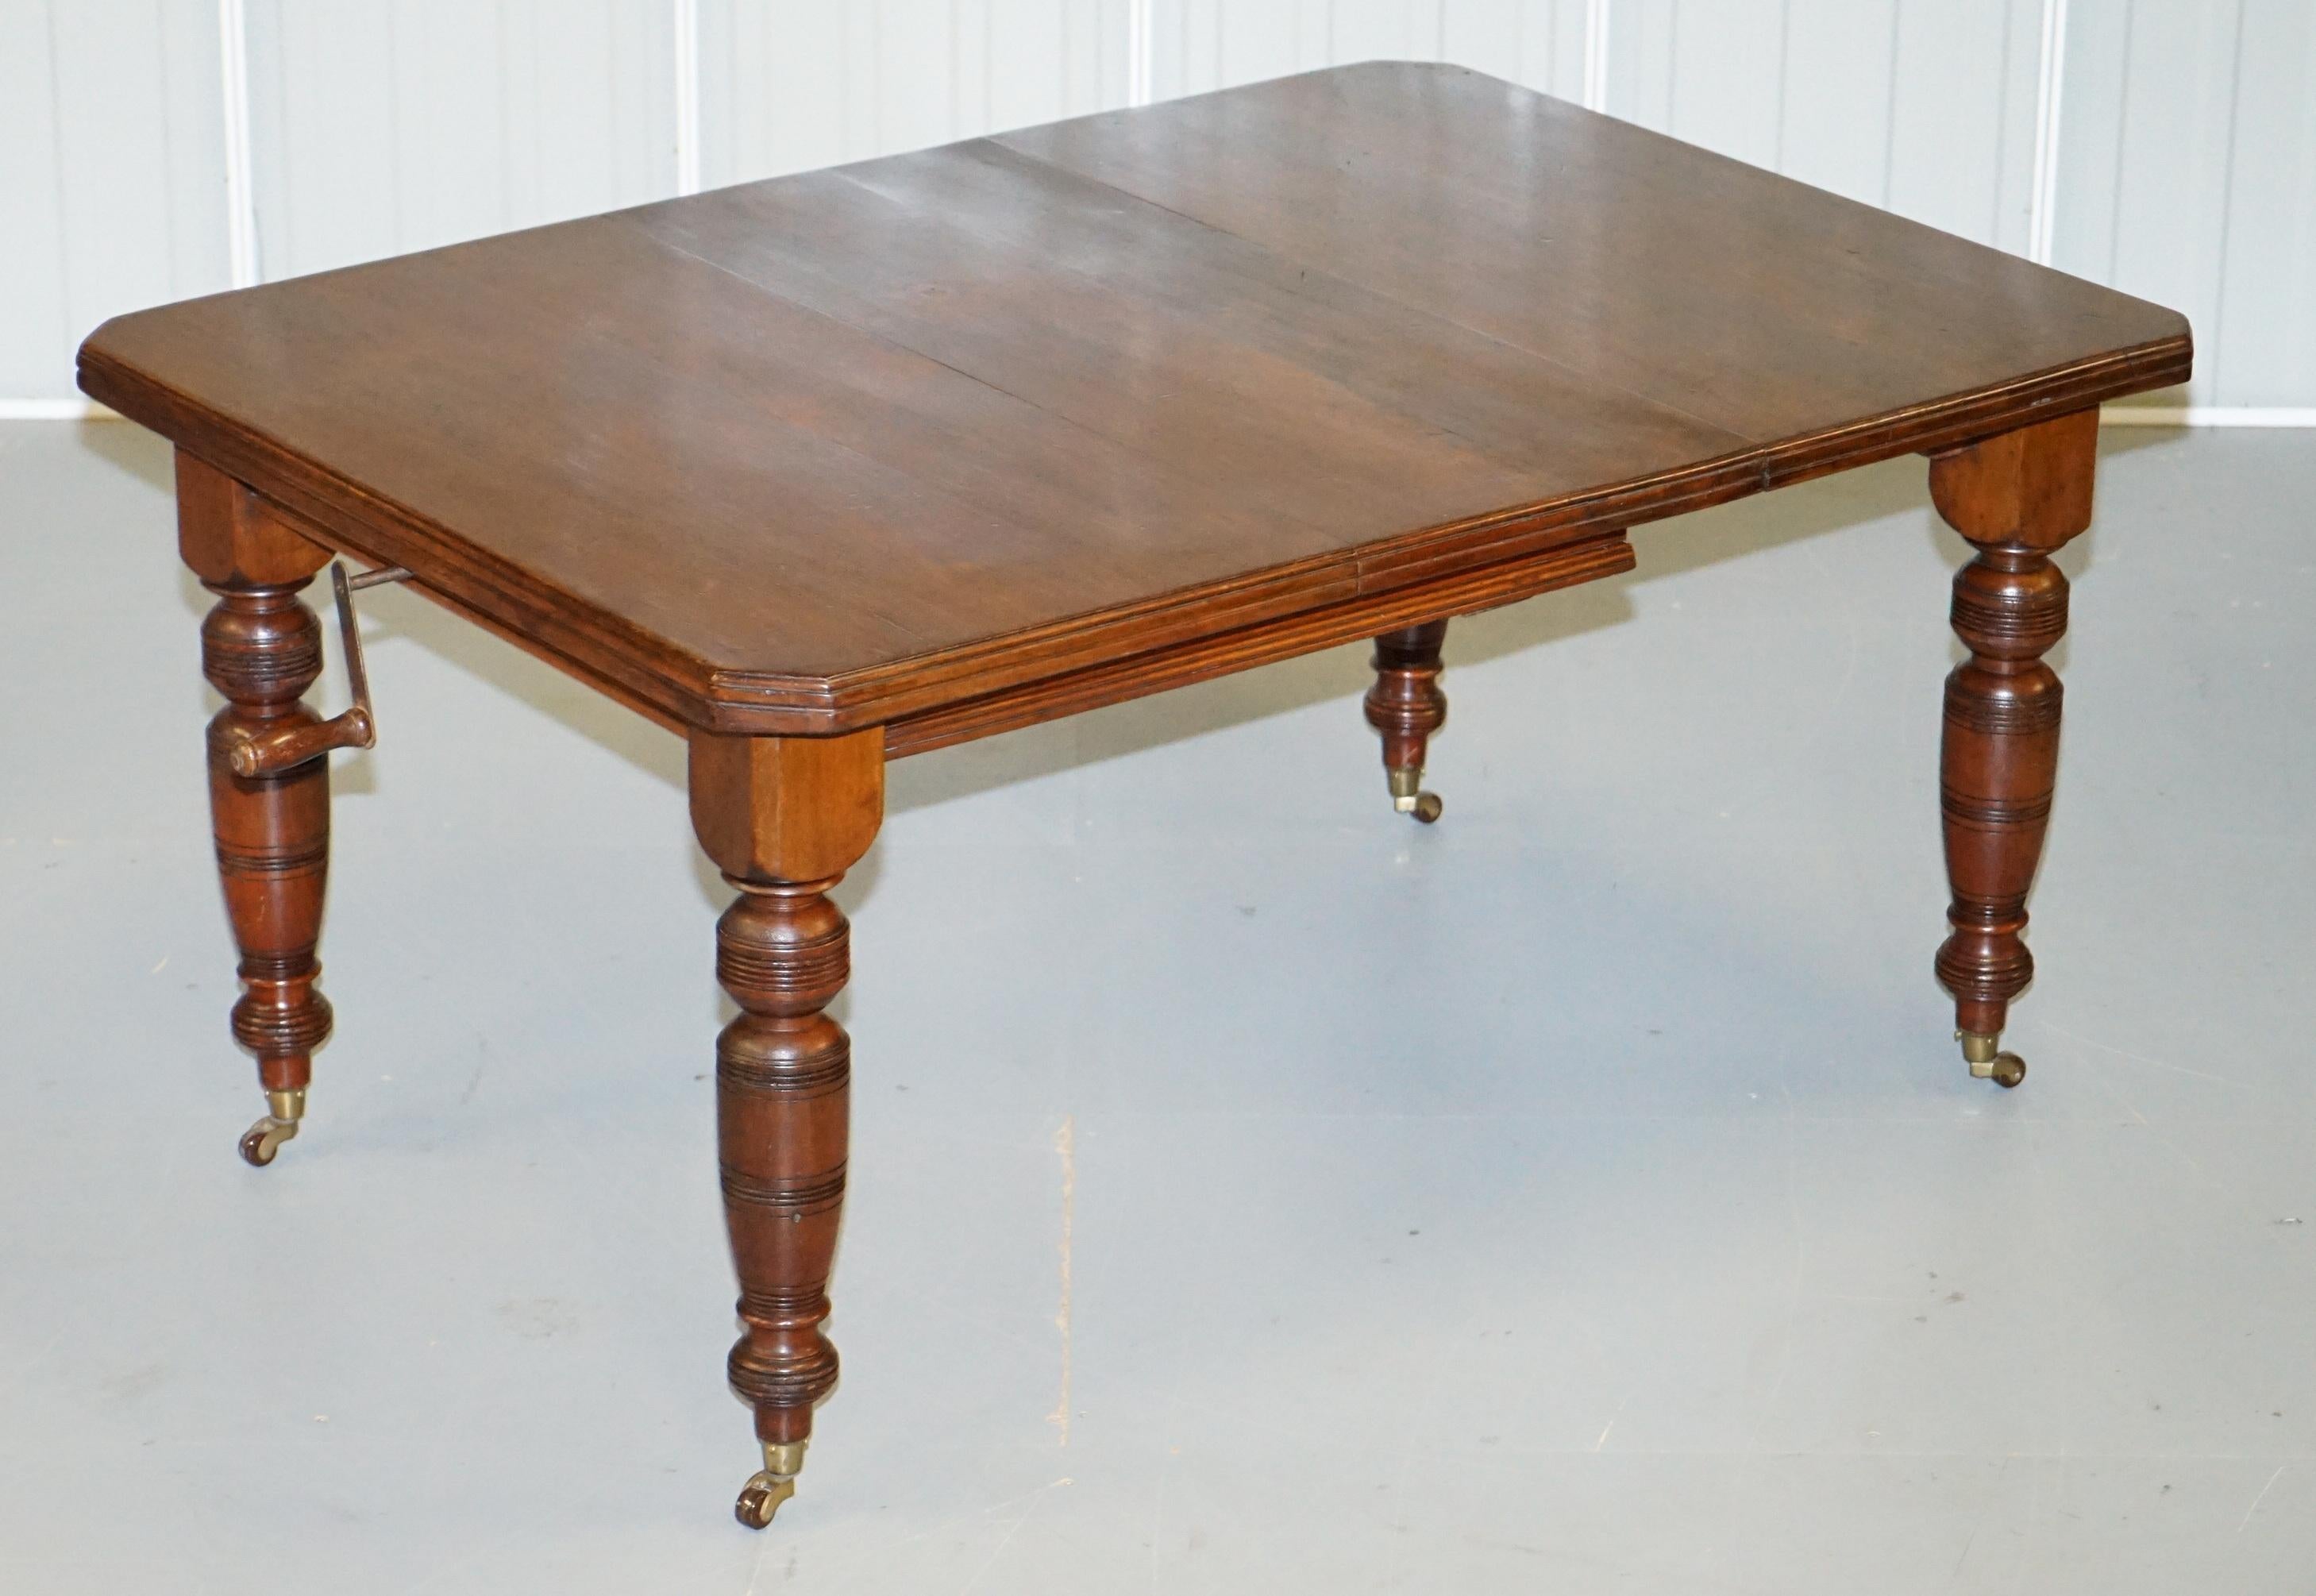 We are delighted to offer for sale this lovely Victorian circa 1880 mahogany wind out dining table with porcelain castors

A nicely sized four to six person wind out Victorian mahogany dining table. This table is a square as you can see and